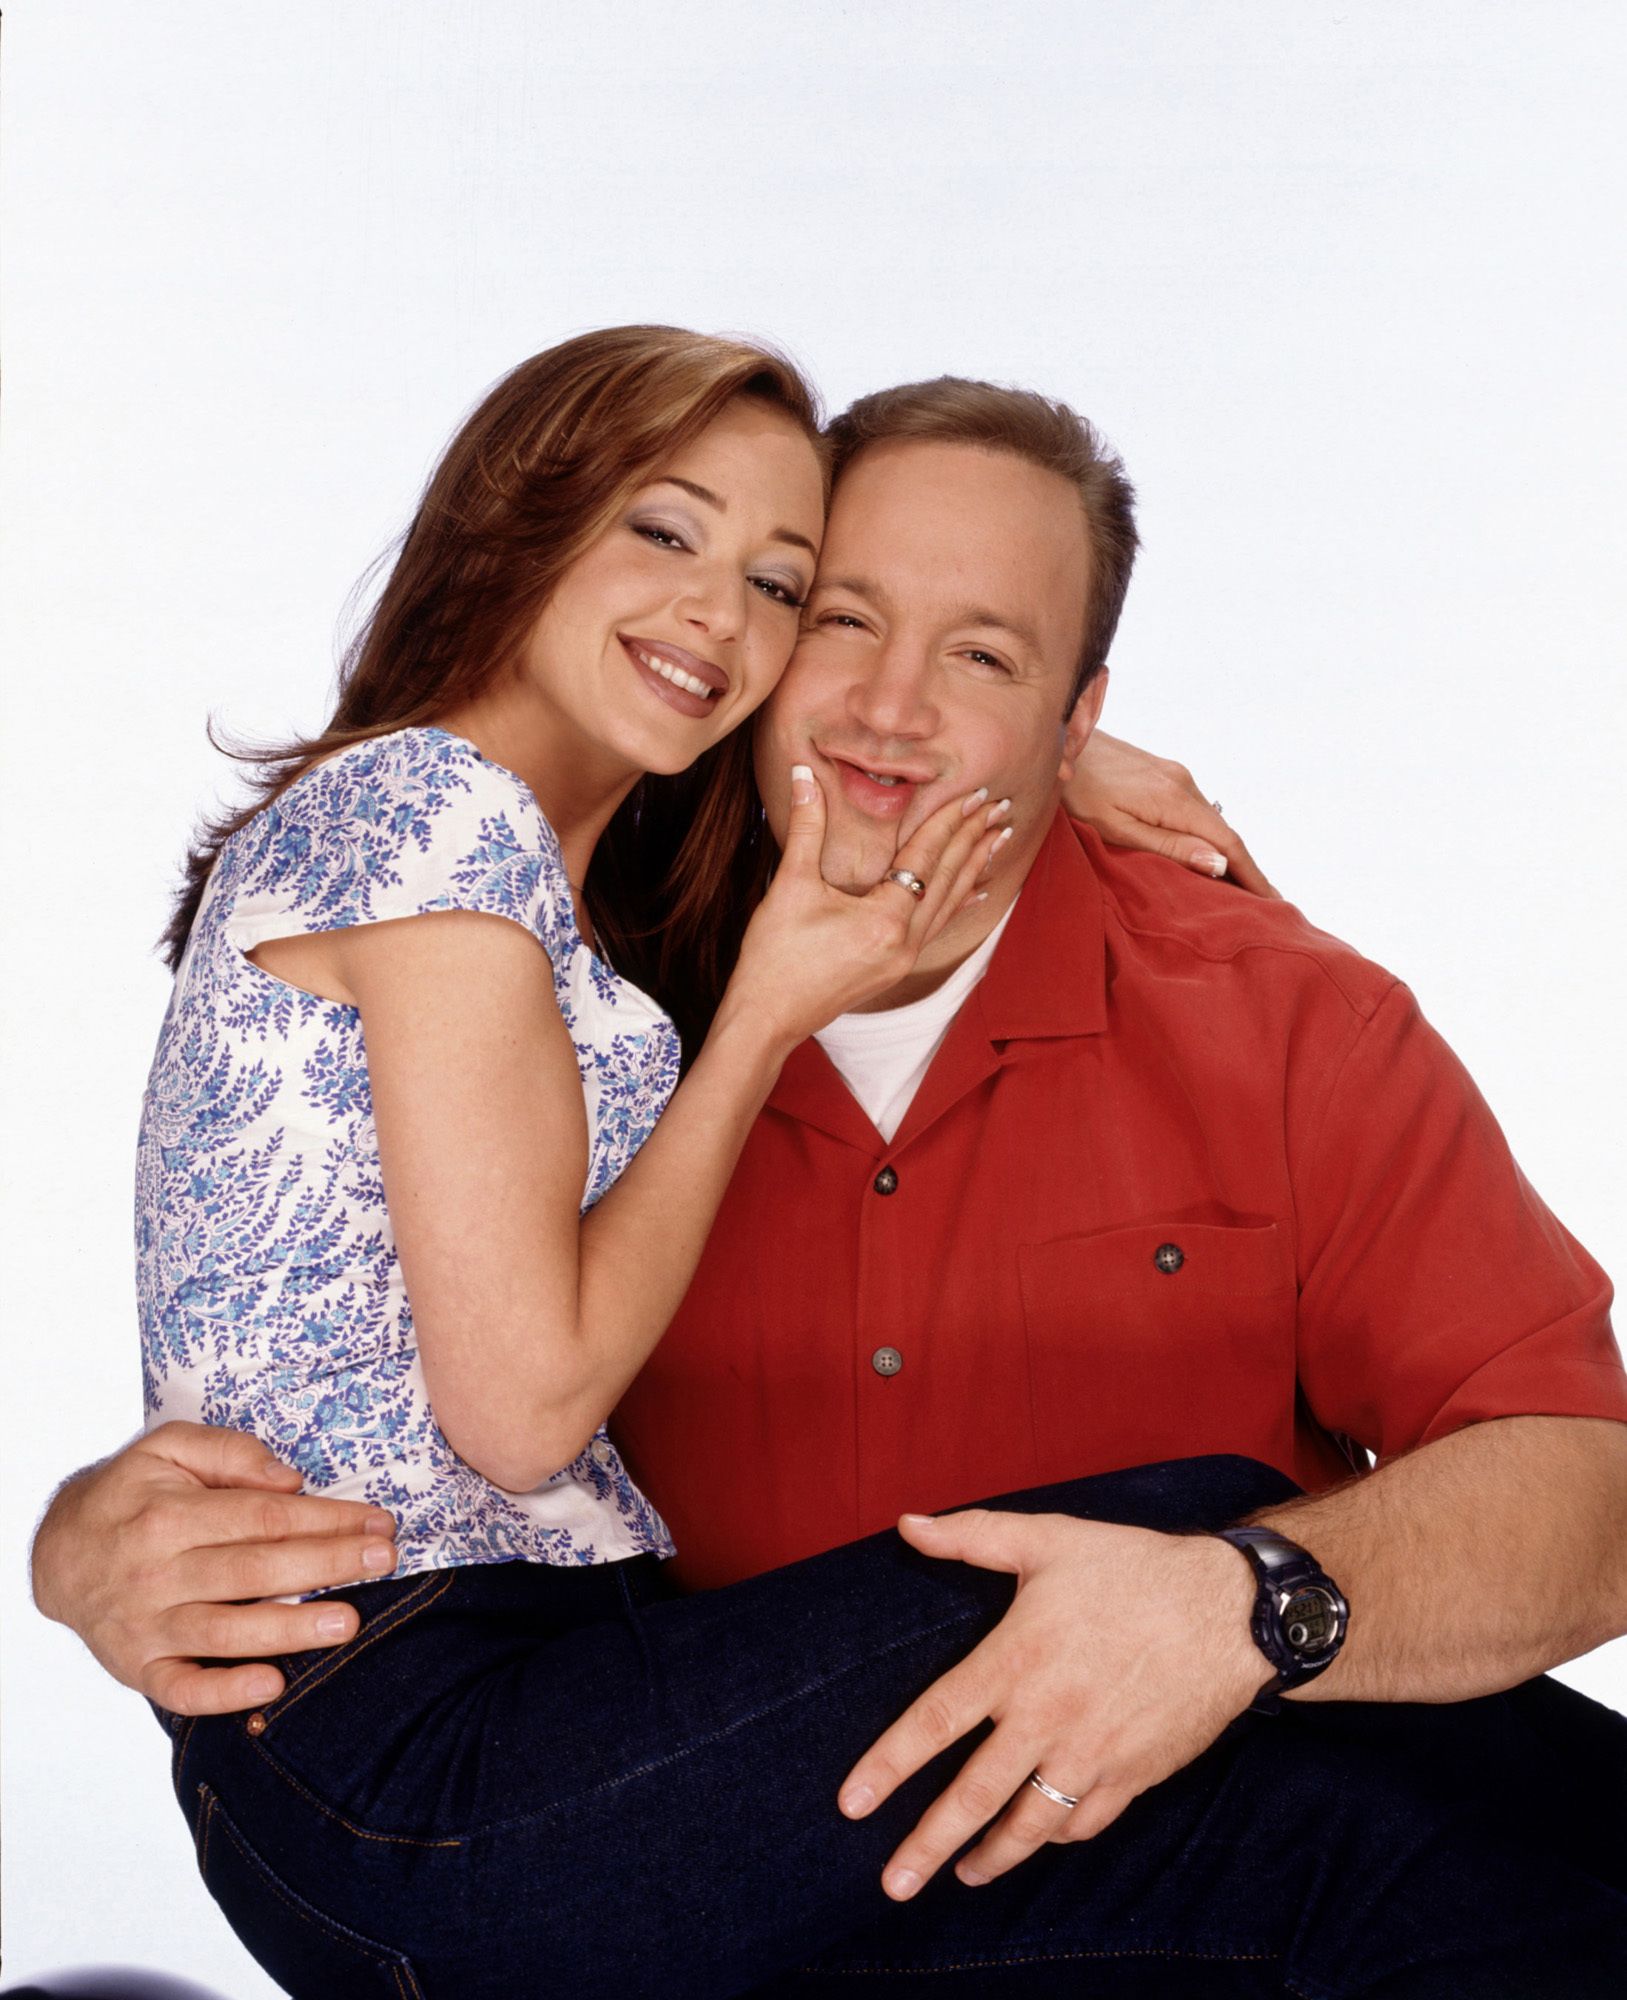 The King Of Queens wallpaper, TV Show, HQ The King Of Queens pictureK Wallpaper 2019